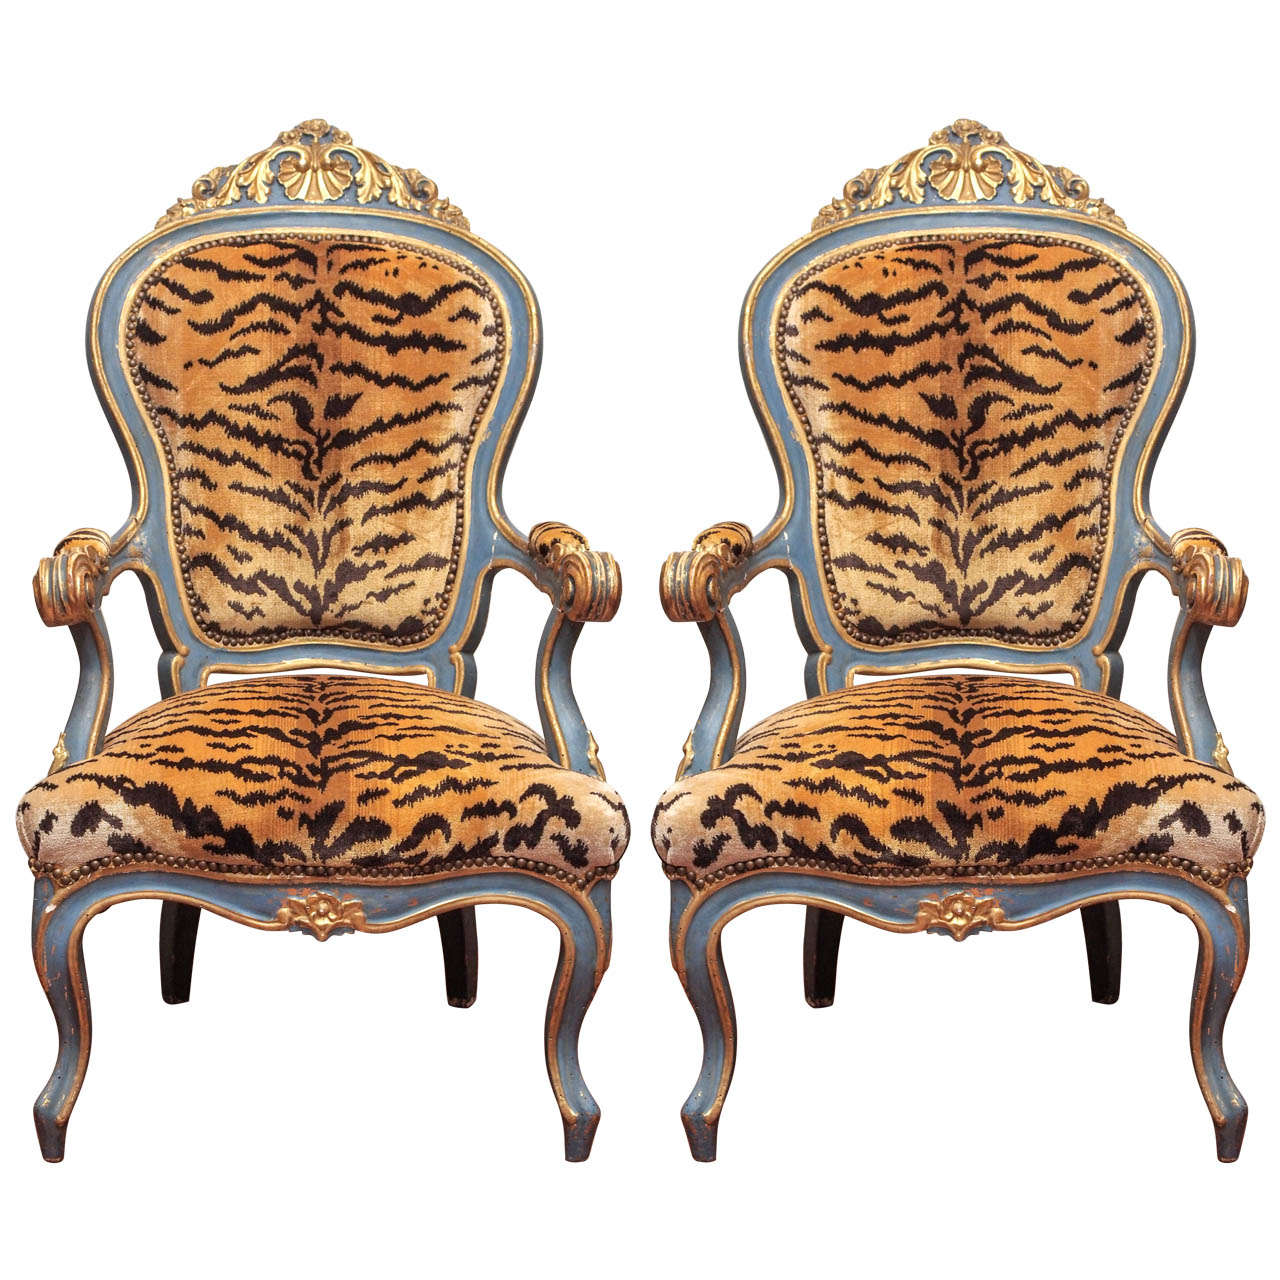 Pair of Italian Late 19th Century Parcel Gilt and Painted Armchairs